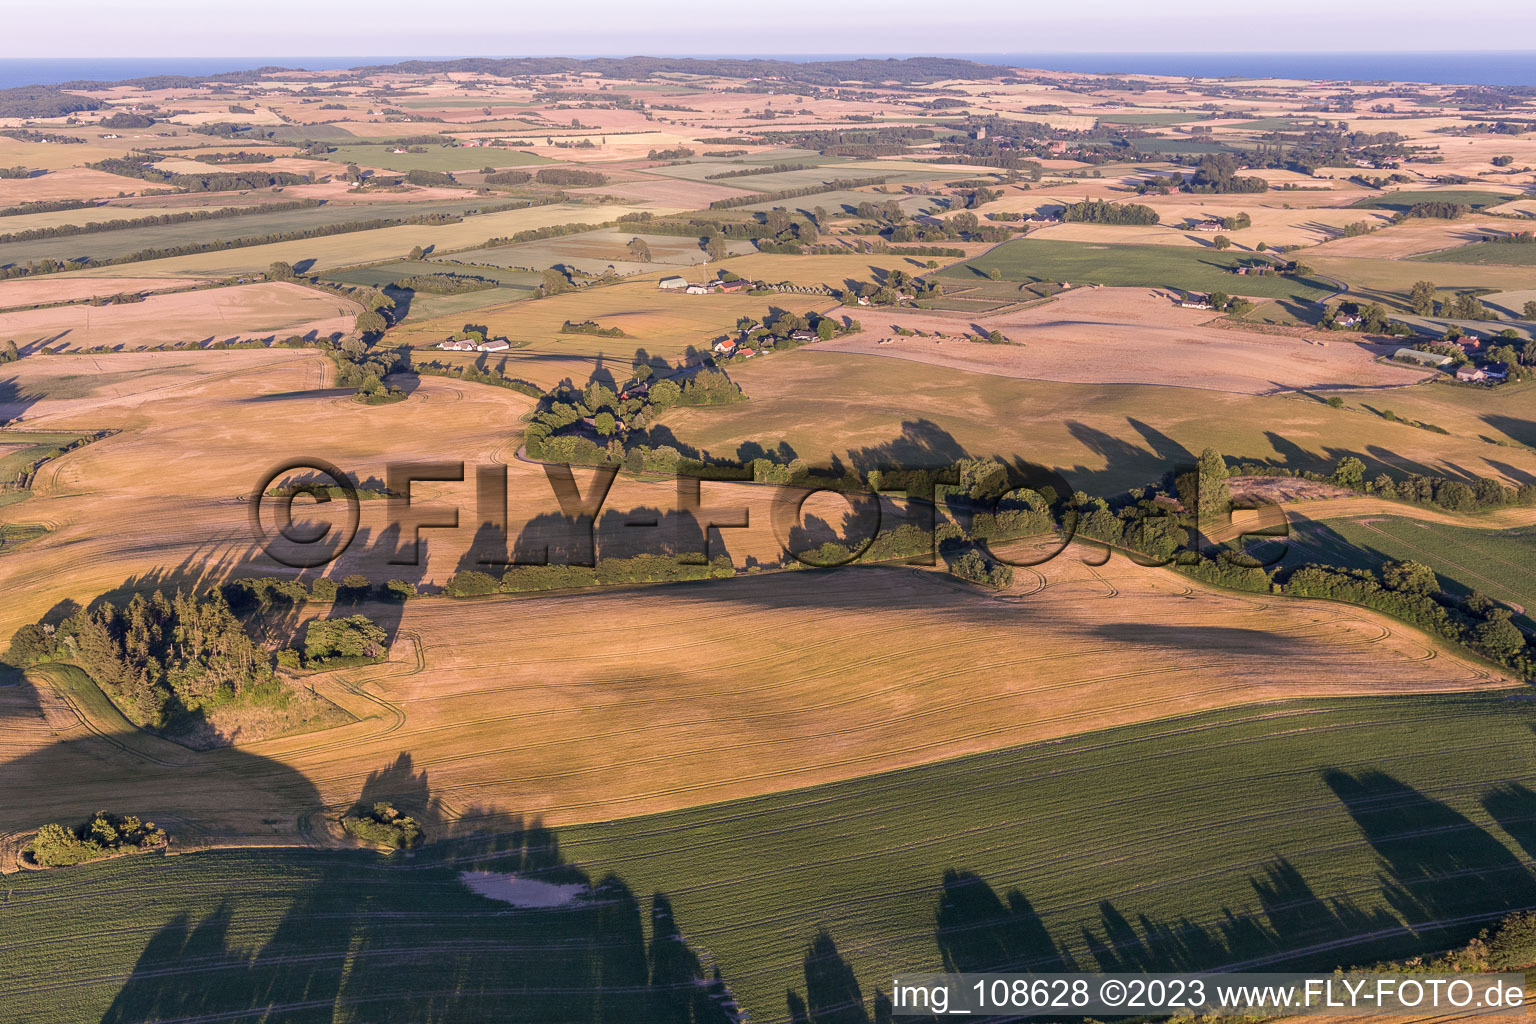 Stege in the state Zealand, Denmark from a drone